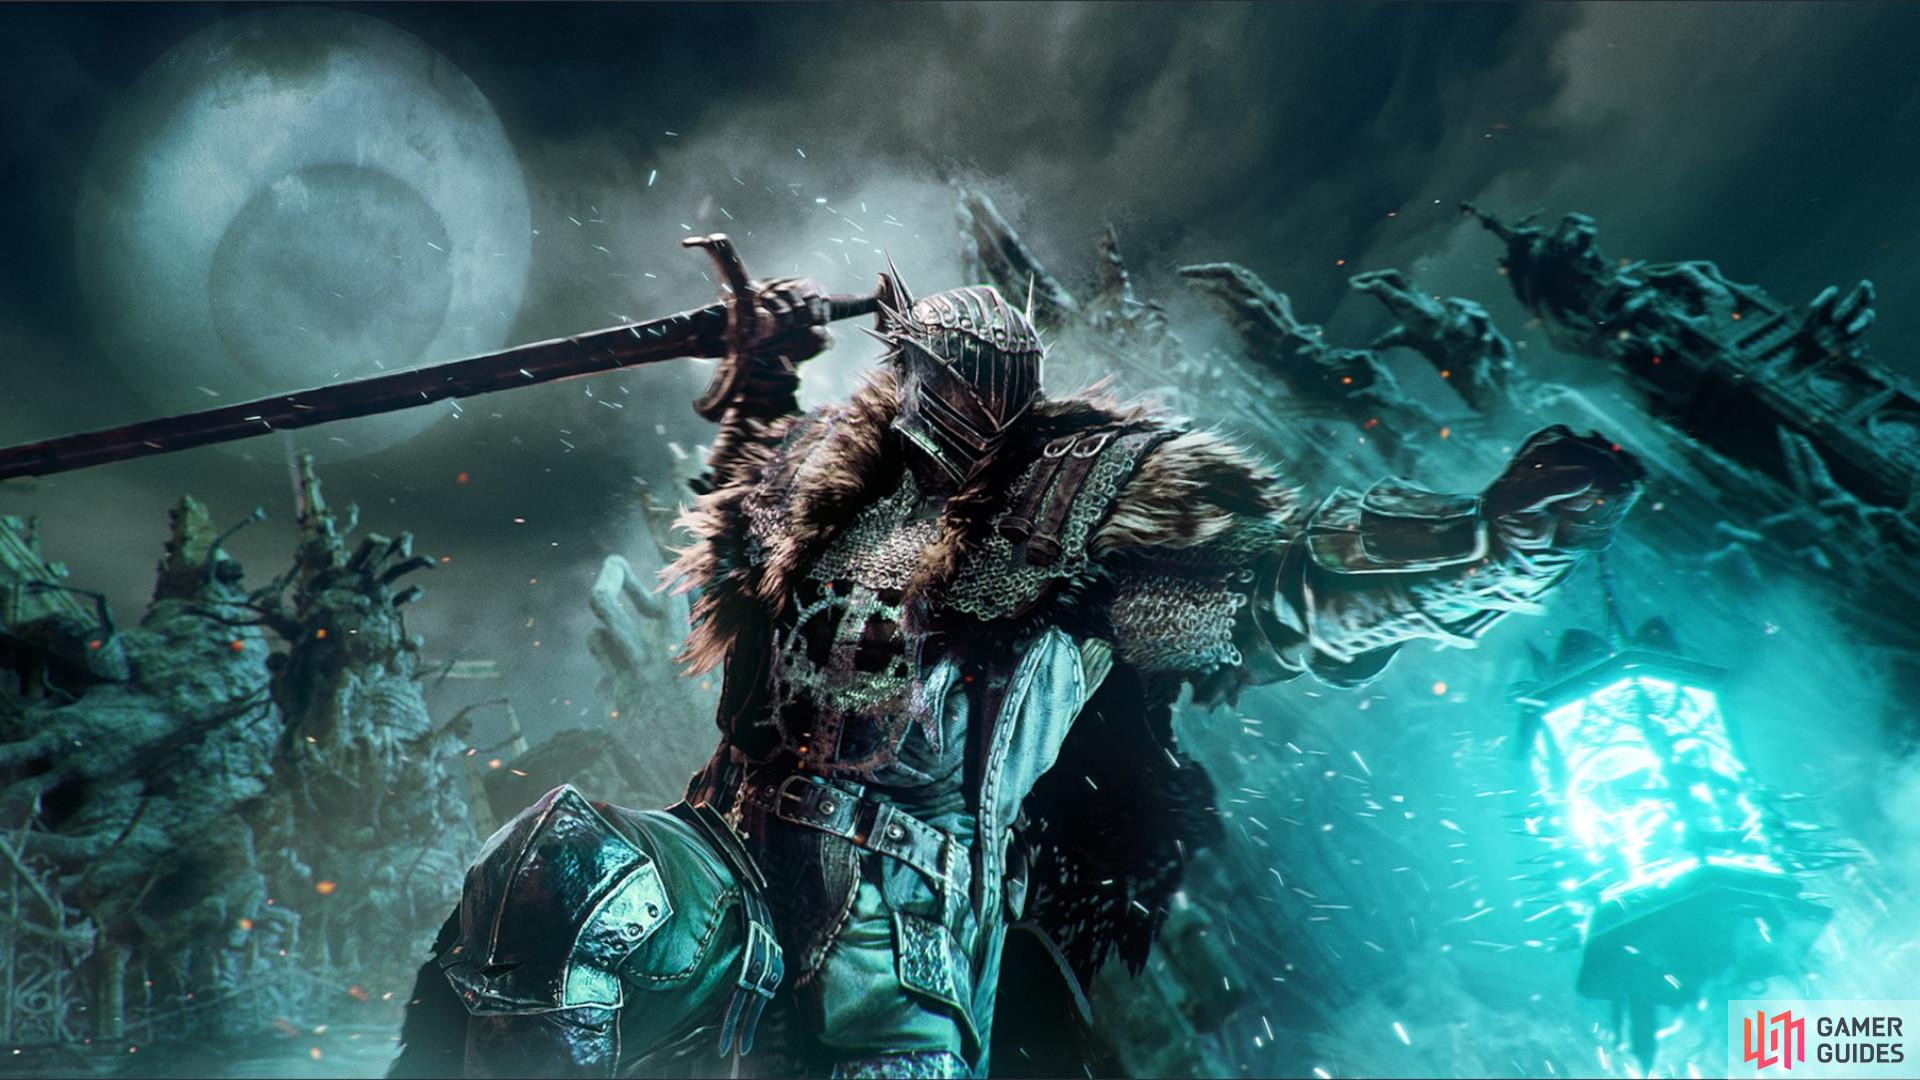 Lords of the Fallen Achievements Guide: The Complete List